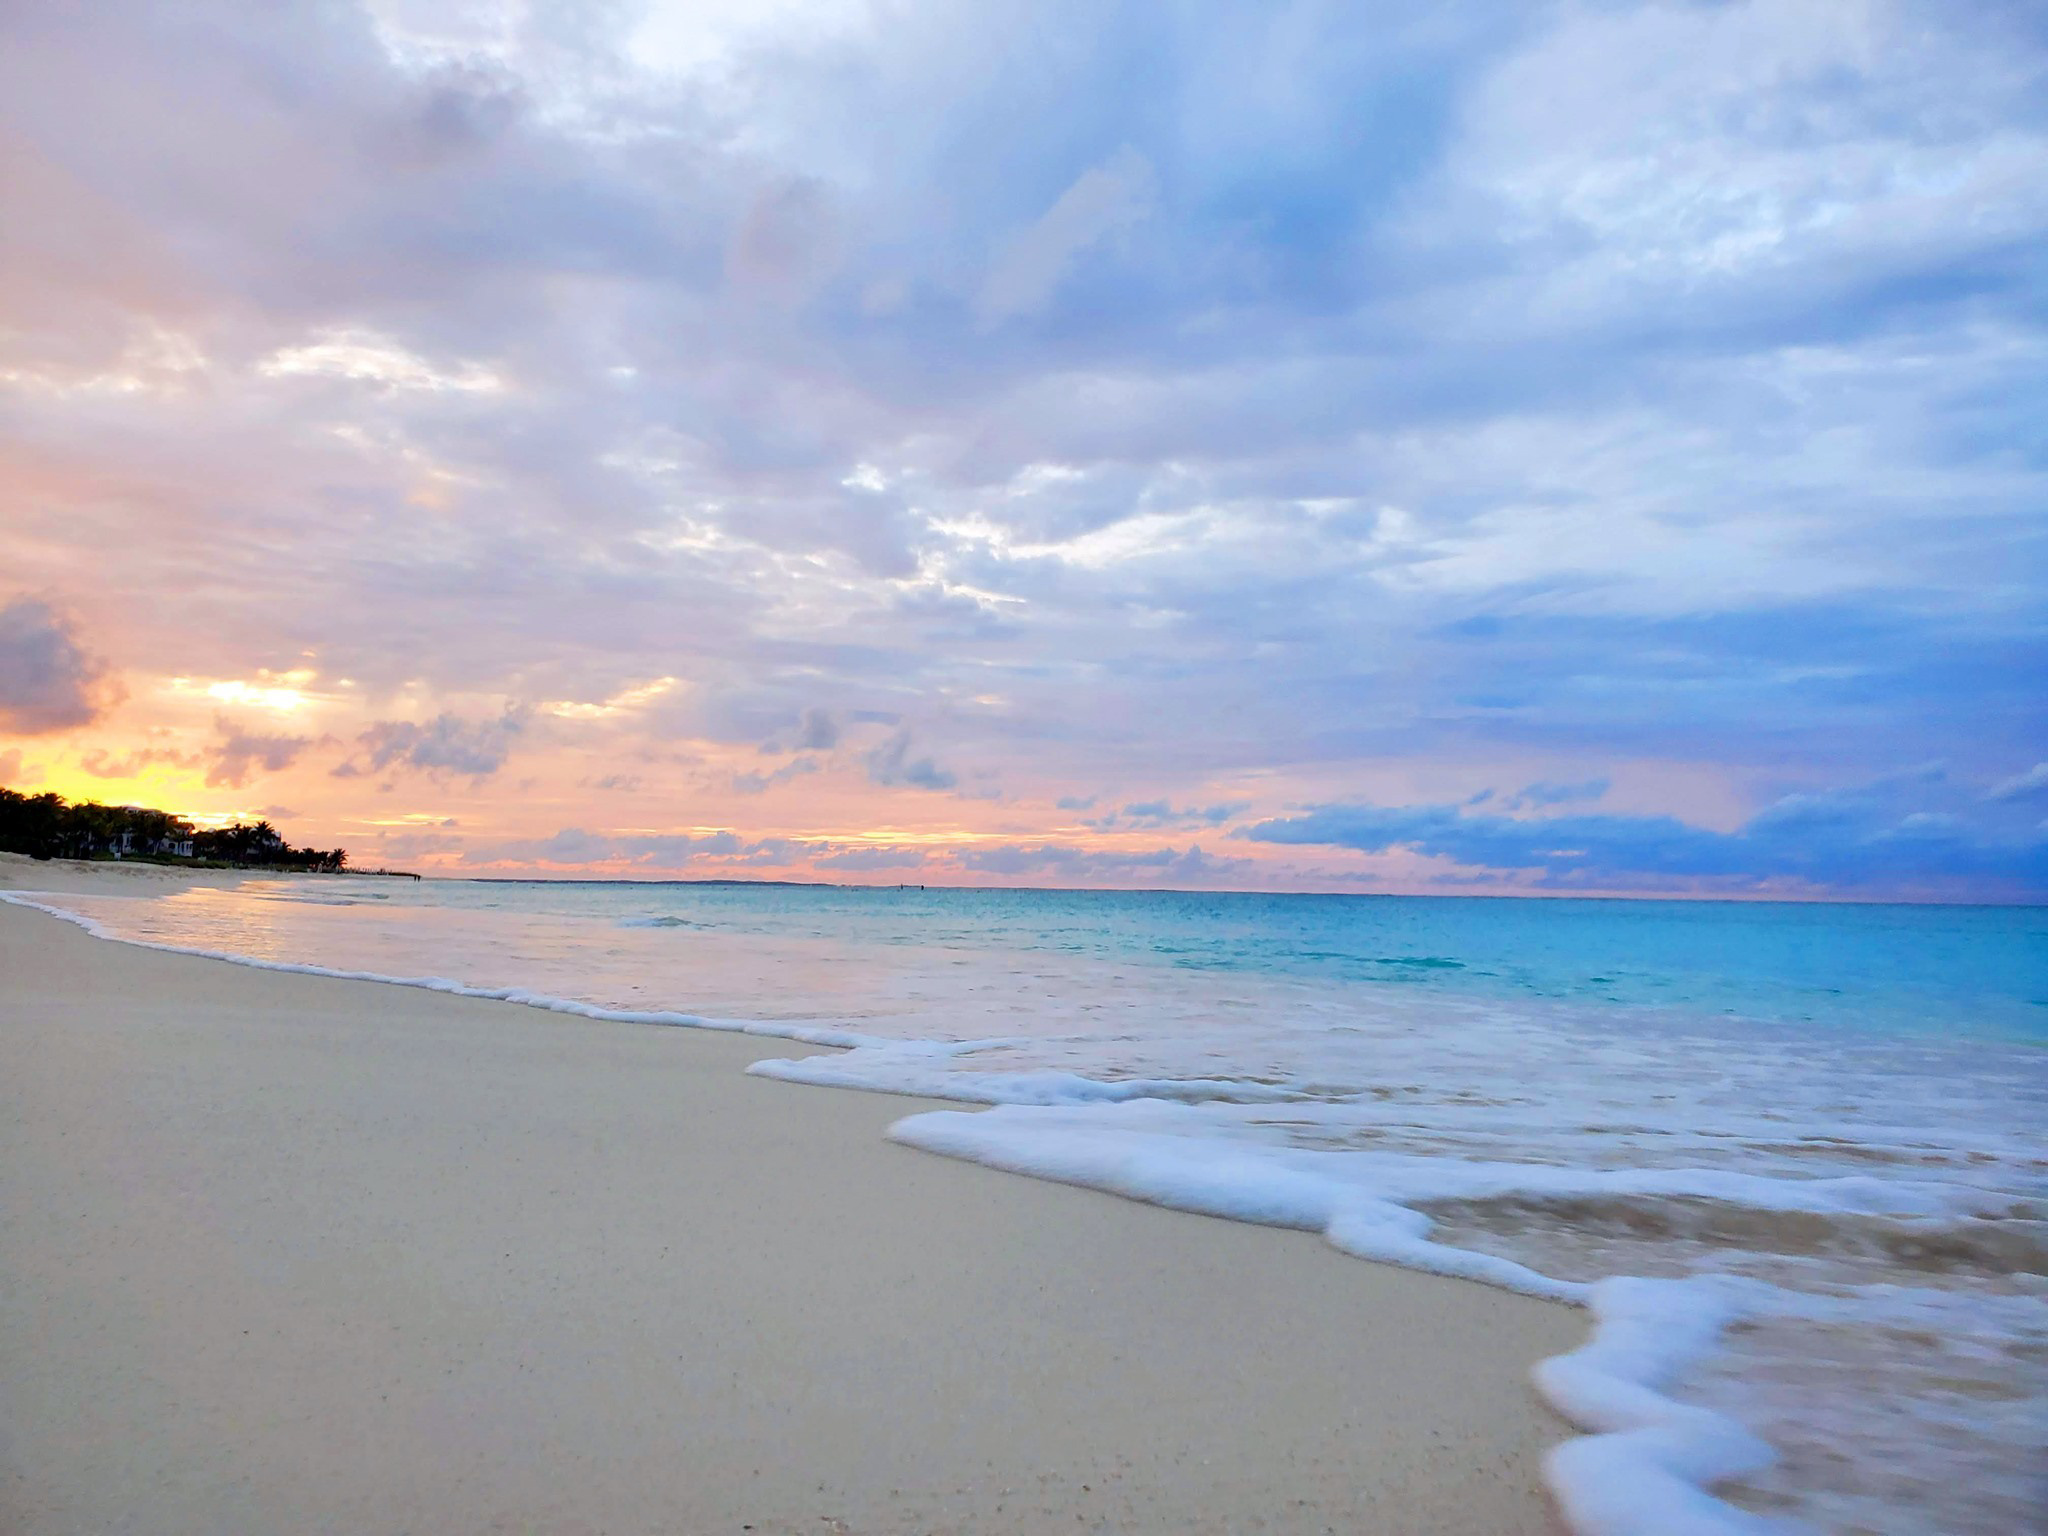 The Ritz-Carlton, Turks & Caicos Resort – Providenciales, Turks and Caicos Islands – Beach View Sunset